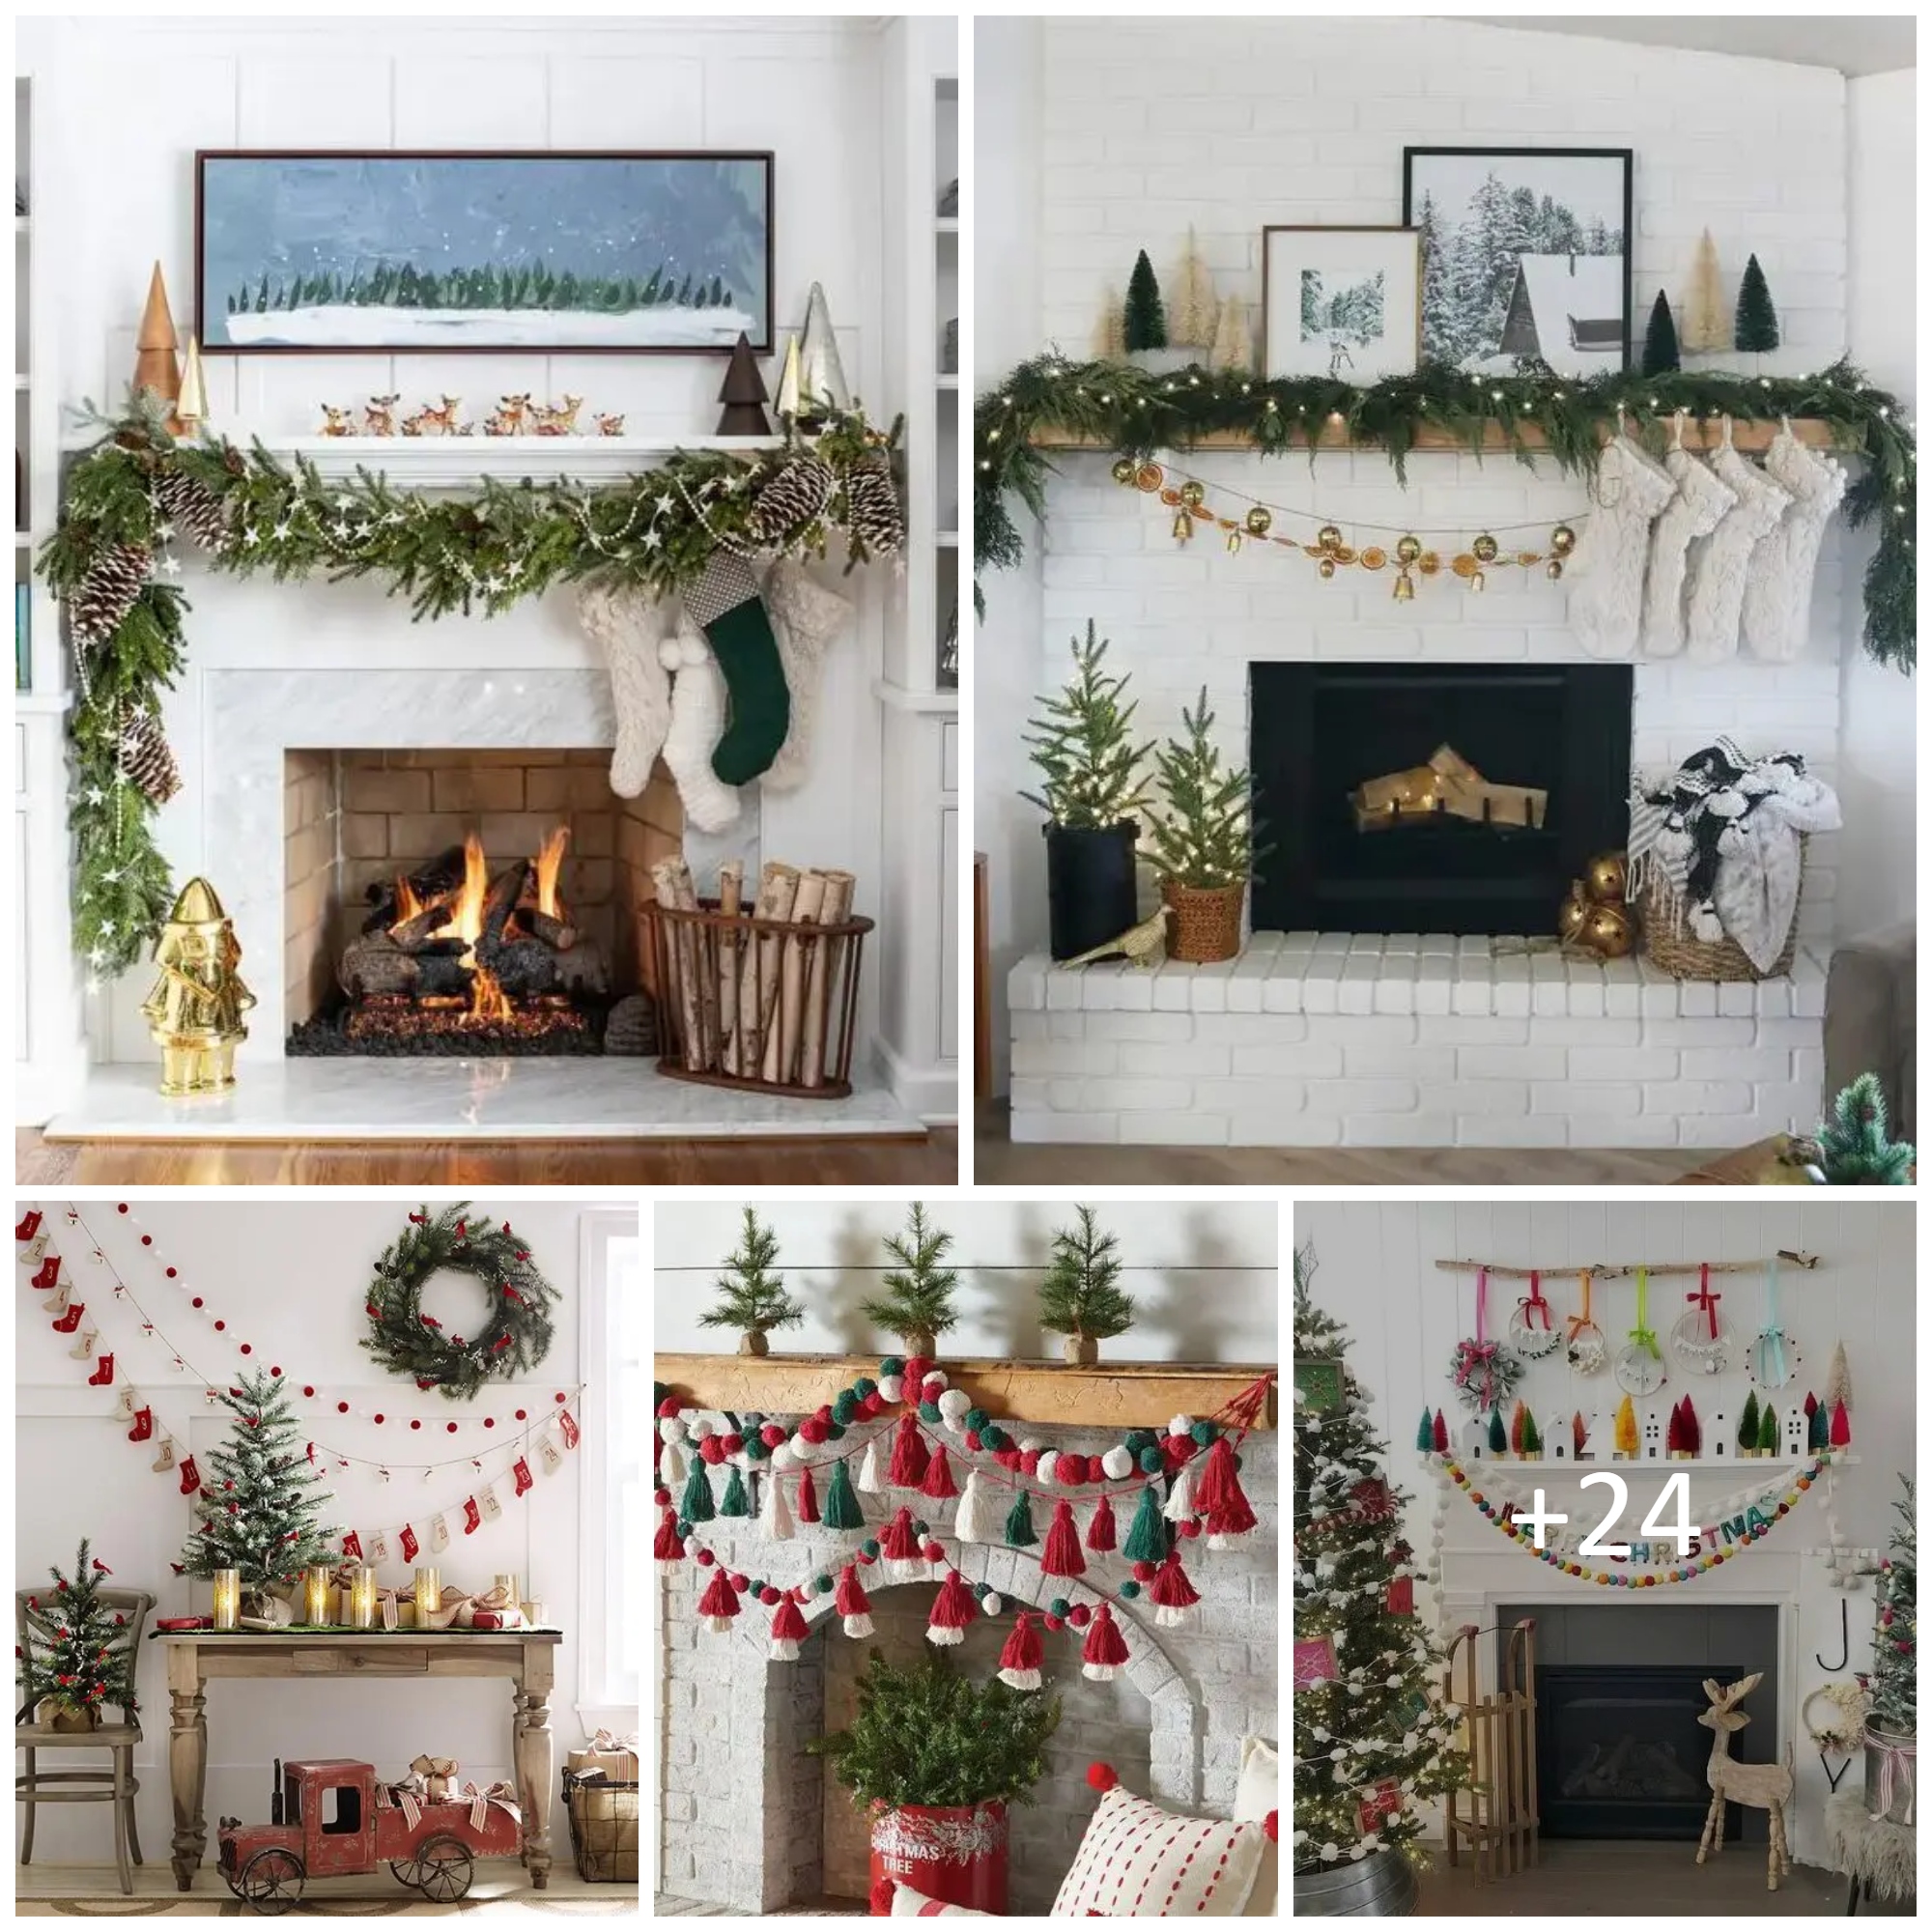 Christmas Garland Ideas That Are Unique and Festive